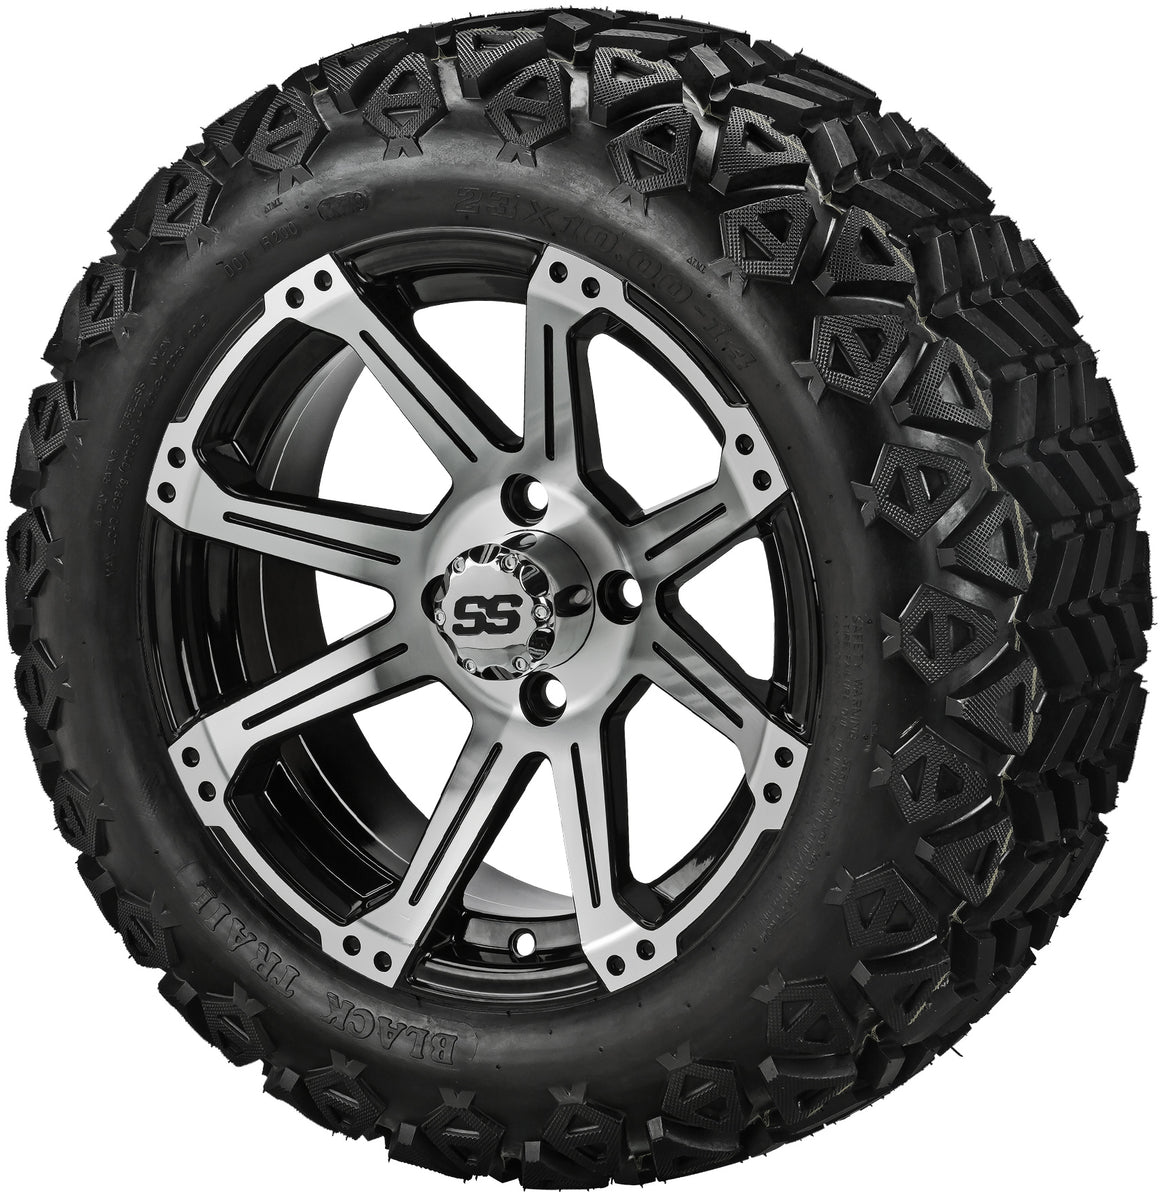 14" Rampage Wheels on 23x10.00-14 Black Trail Tires Combo